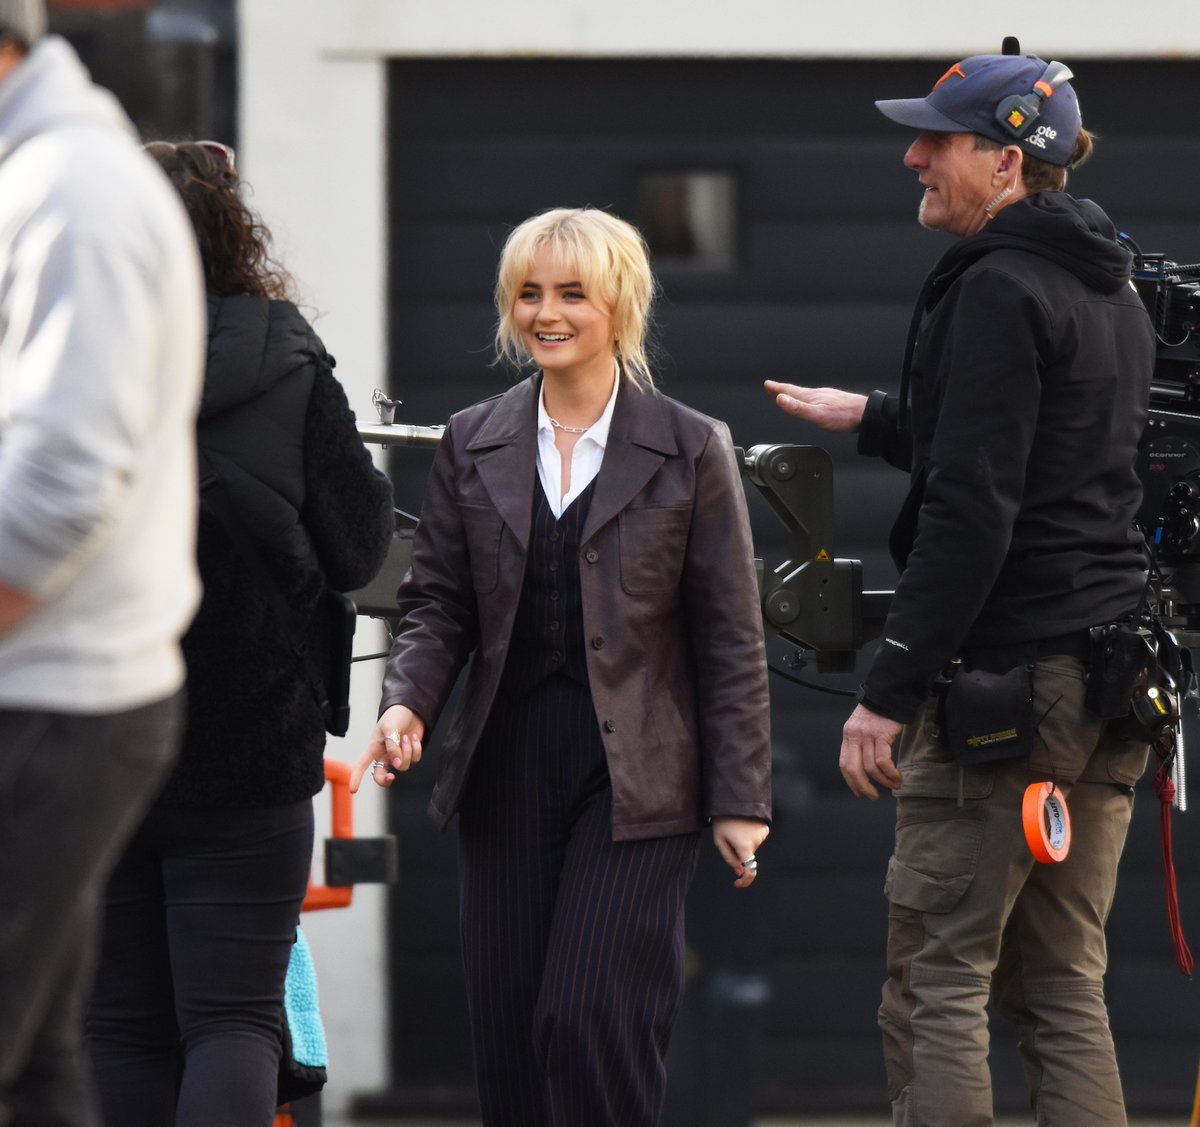 #dwsr more of Millie Gibson on set from yesterday's Doctor Who filming in Bristol.